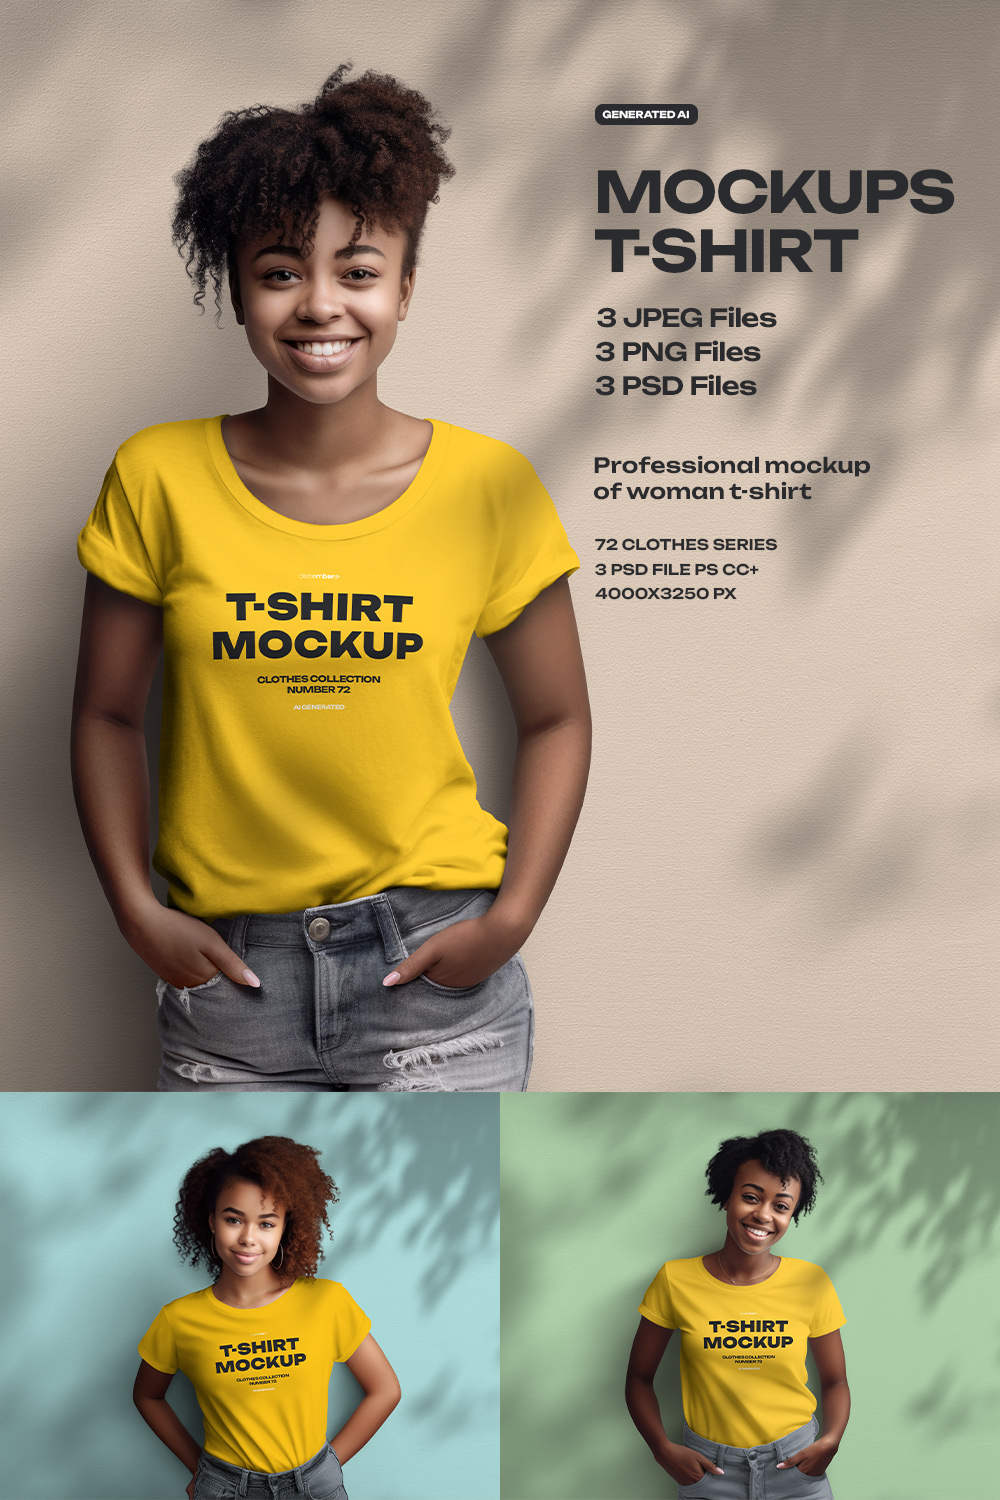 T-shirt Mockups on 3 Different African American Women Generated AI pinterest preview image.